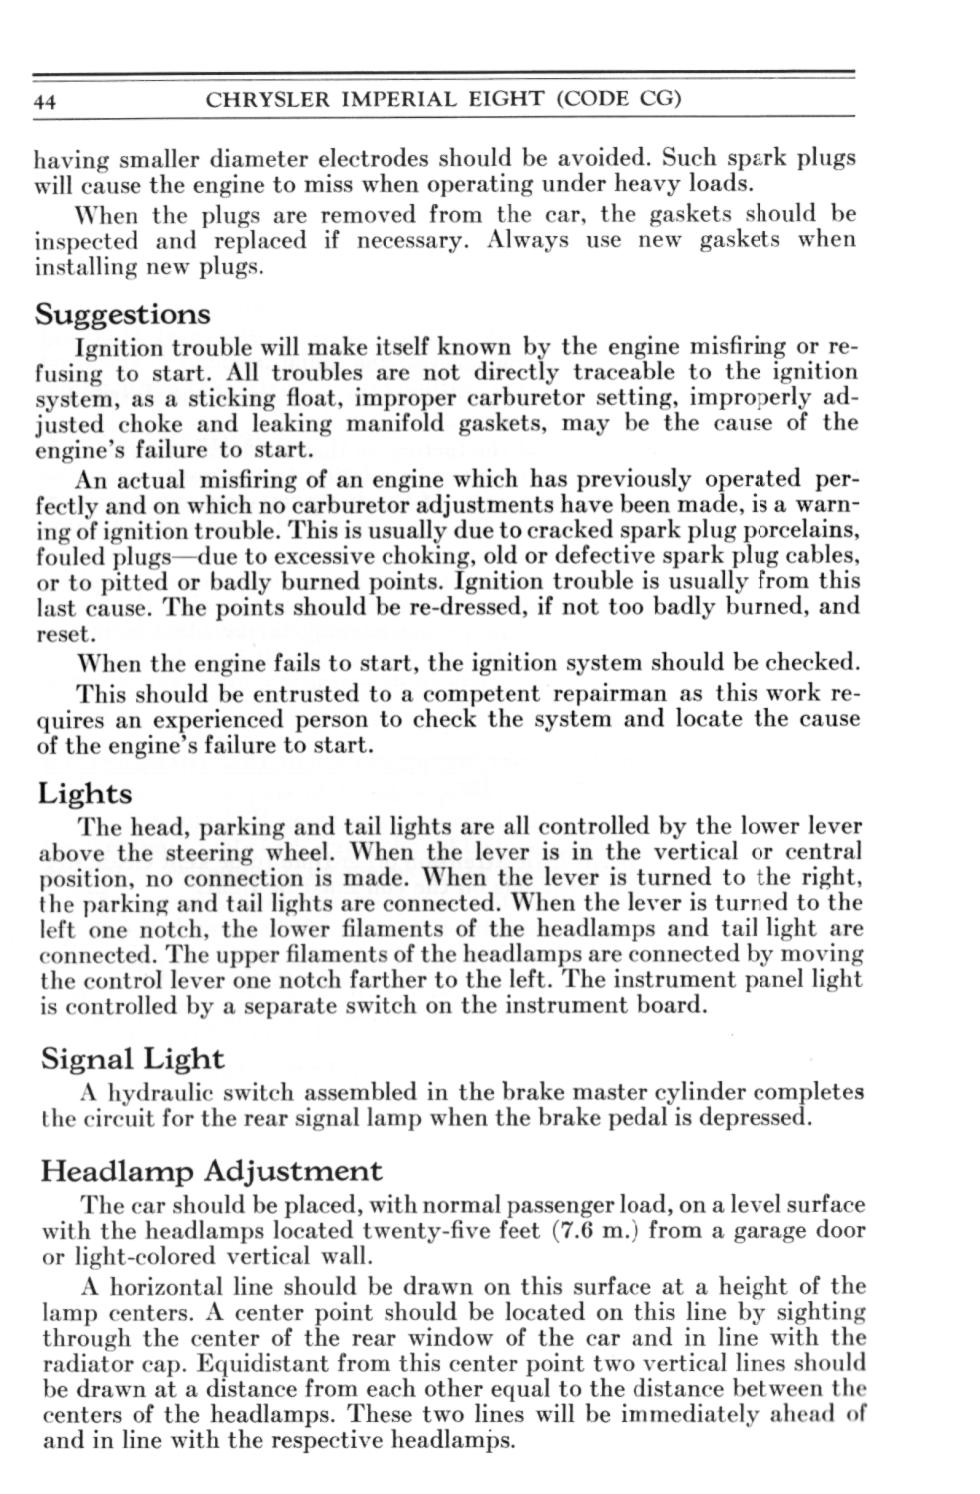 1931 Chrysler Imperial Owners Manual Page 45